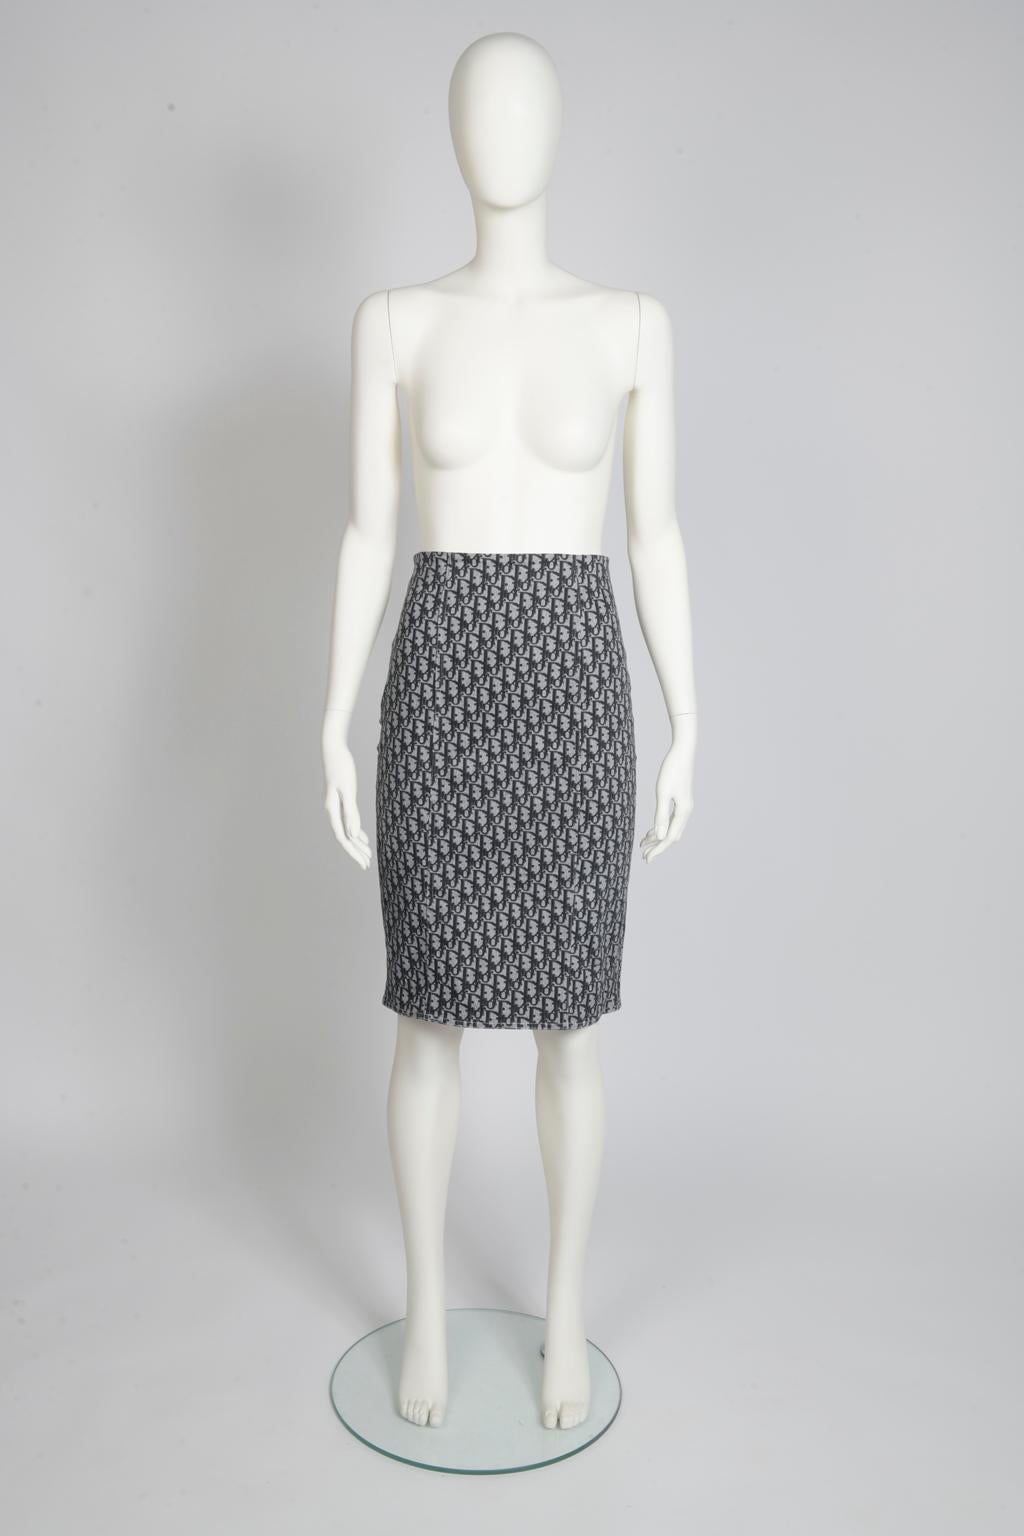 Incredibly wearable though with the Galliano twist, this pencil skirt will be a classic in your wardrobe. Cut from stretchy cotton (98%) and lycra (2%) in a thigh-skimming fit, this knee-length skirt is made of the iconic 